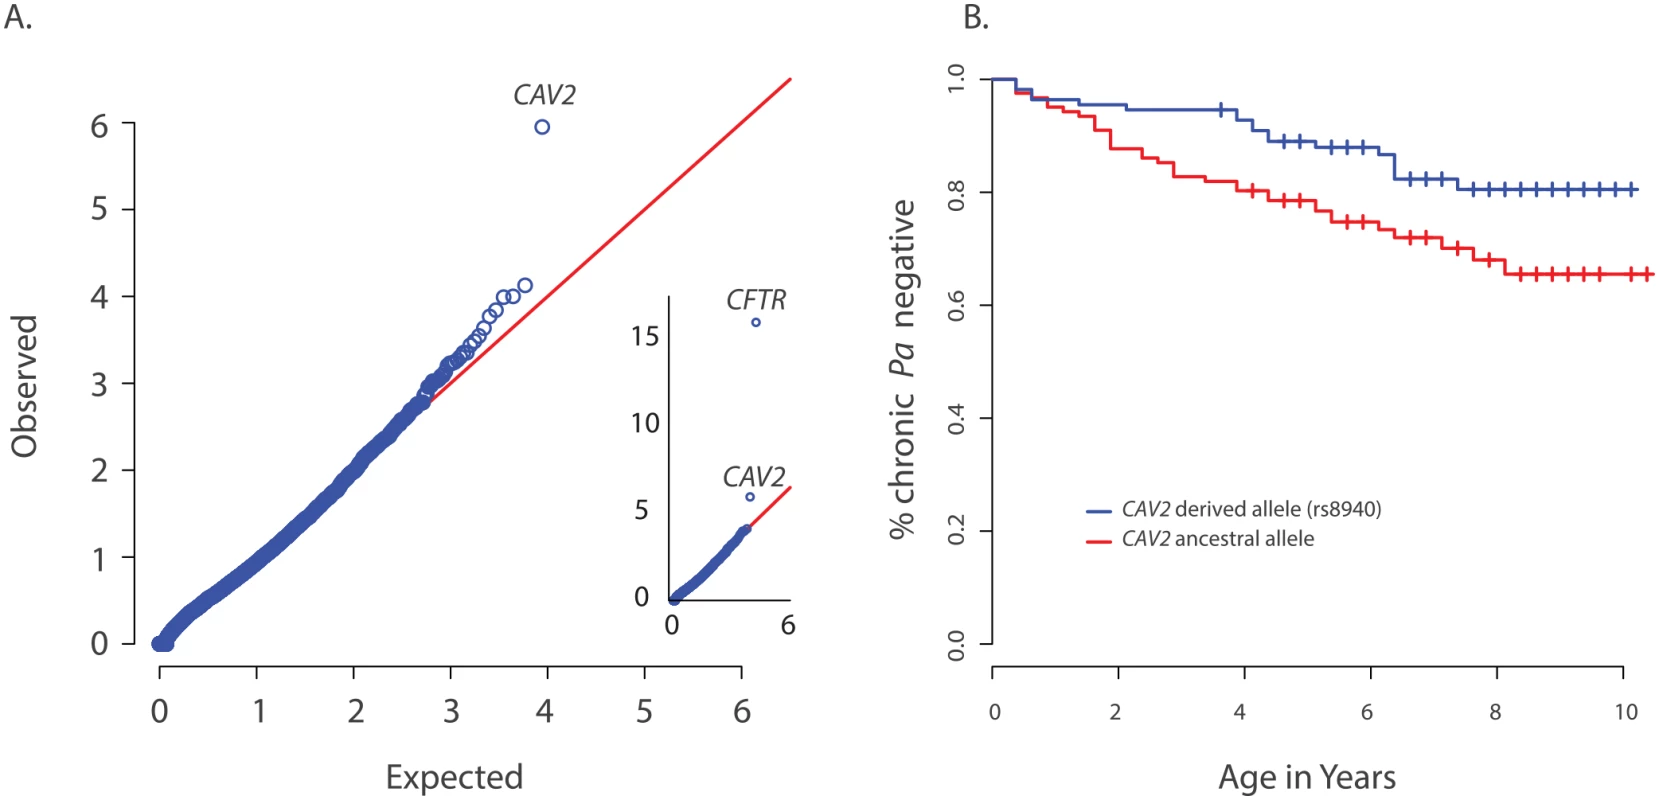 Primary results for <i>CAV2</i> from exome discovery and validation phases.